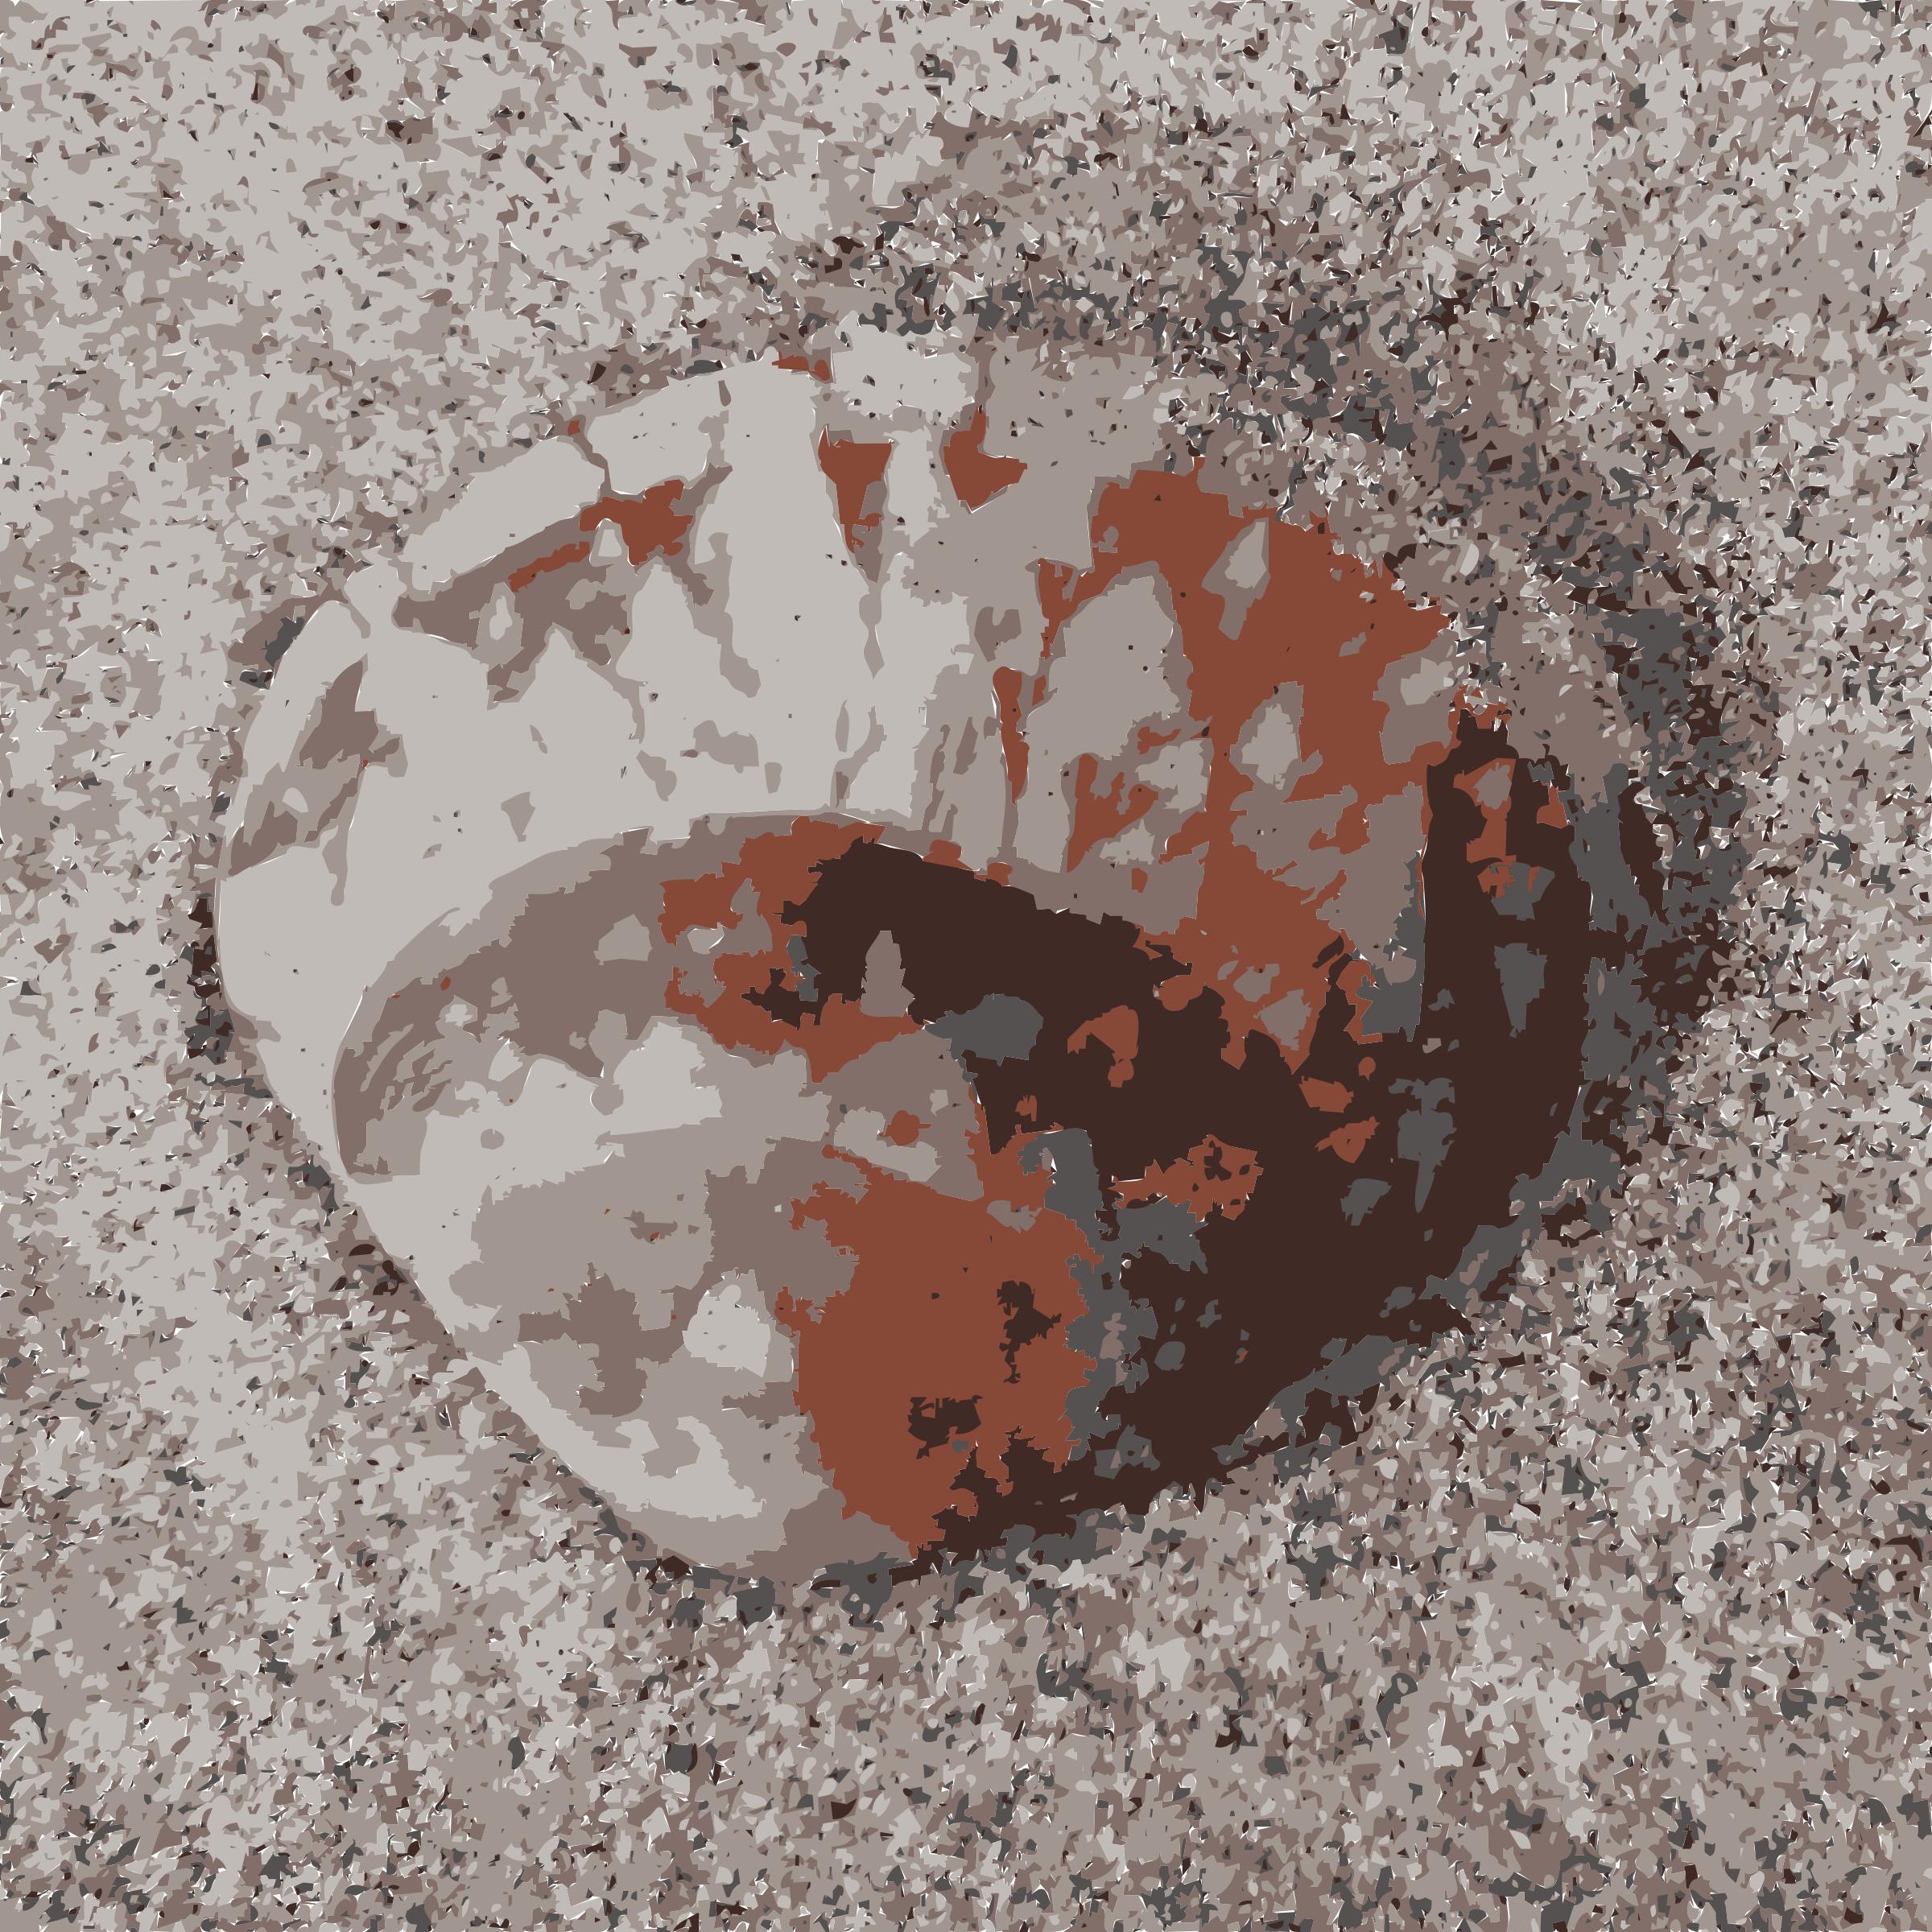 Shell on Beach has a Fractal Pattern png